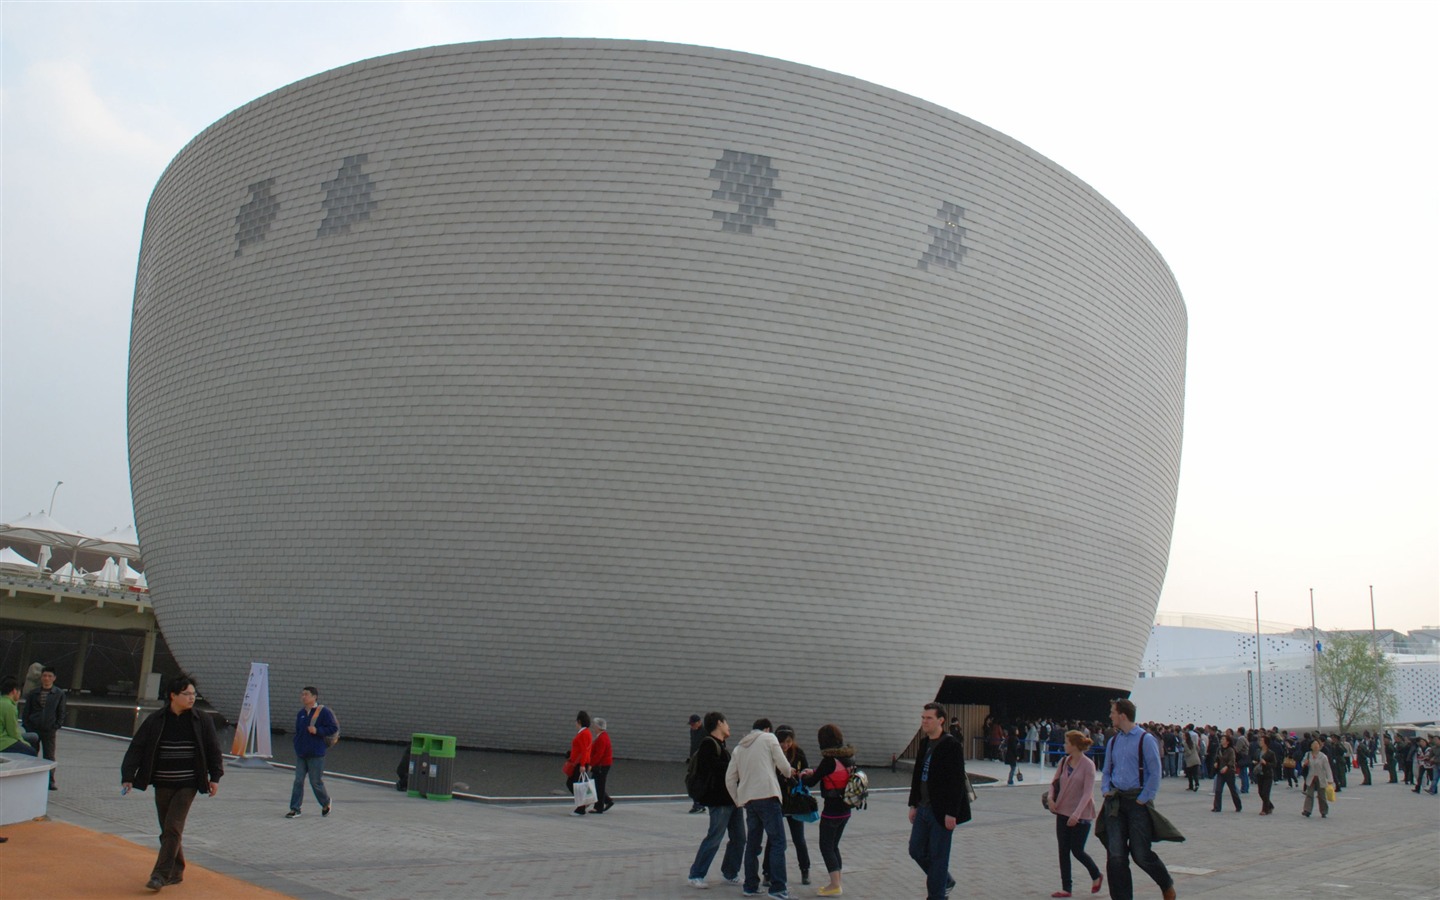 Commissioning of the 2010 Shanghai World Expo (studious works) #24 - 1440x900